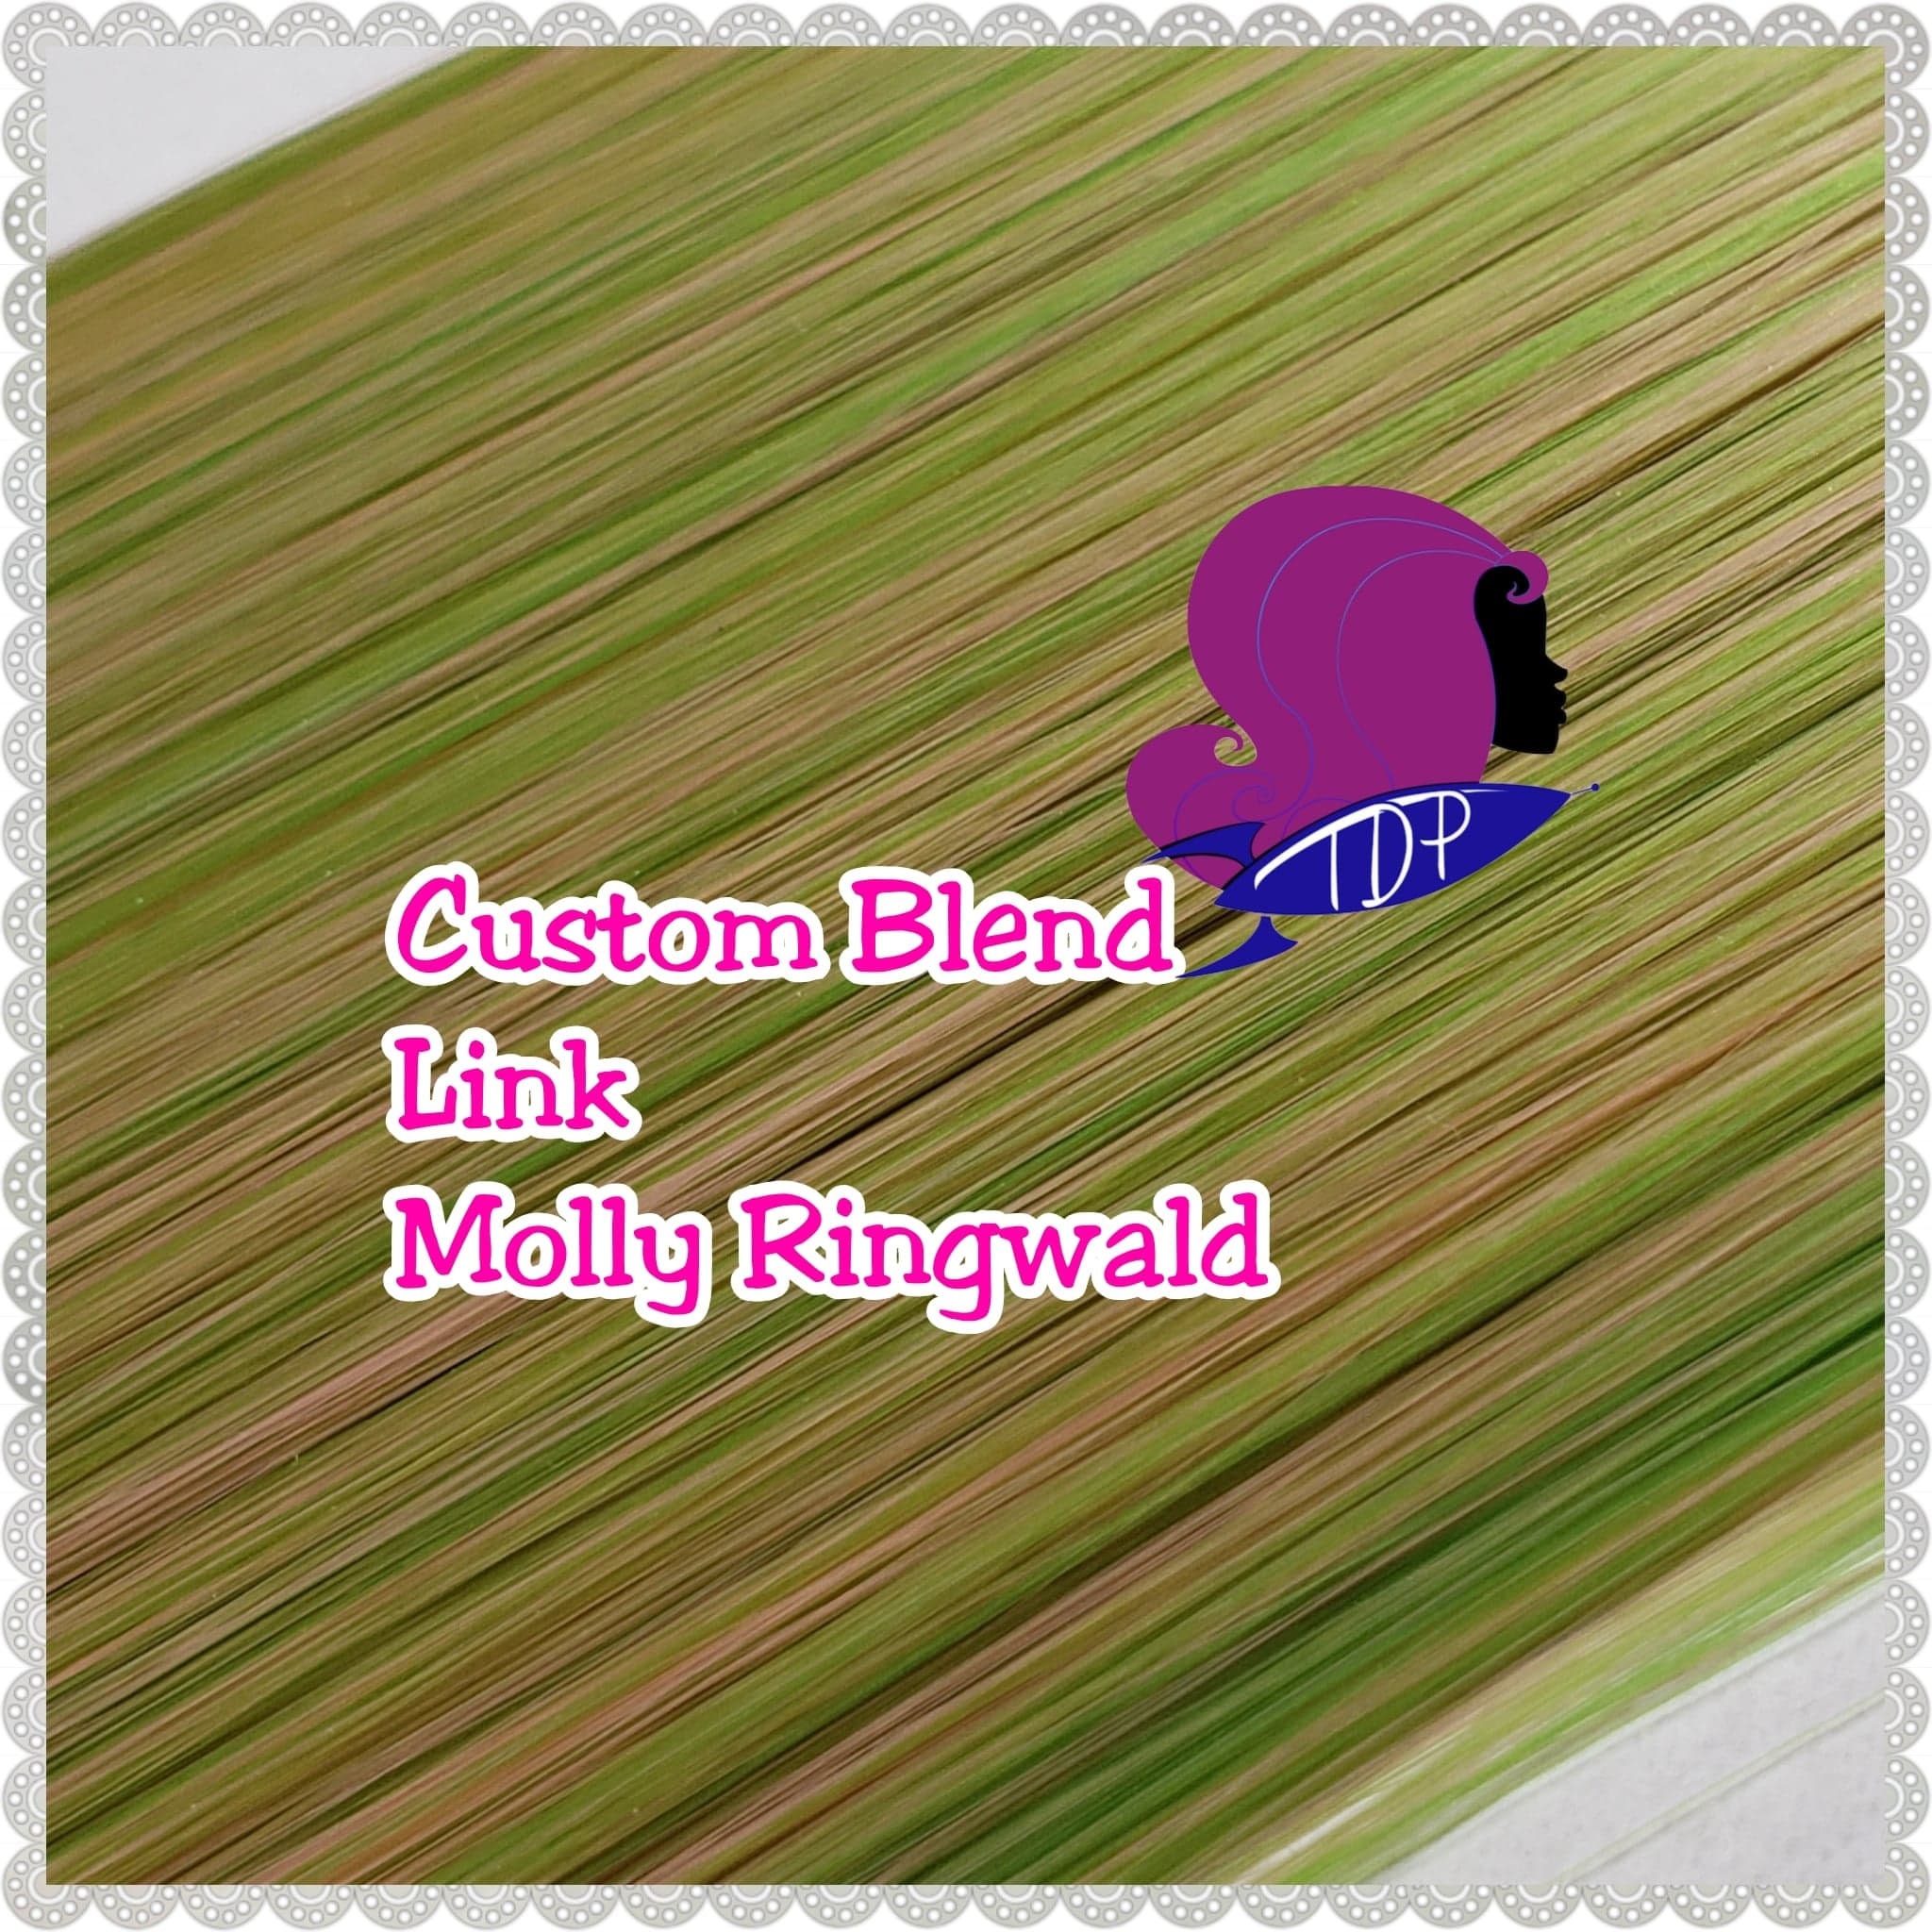 2 Color Blend Nylon Doll Hair Hank Link Molly Ringwald For Rerooting My Little Pony Fashion Dolls